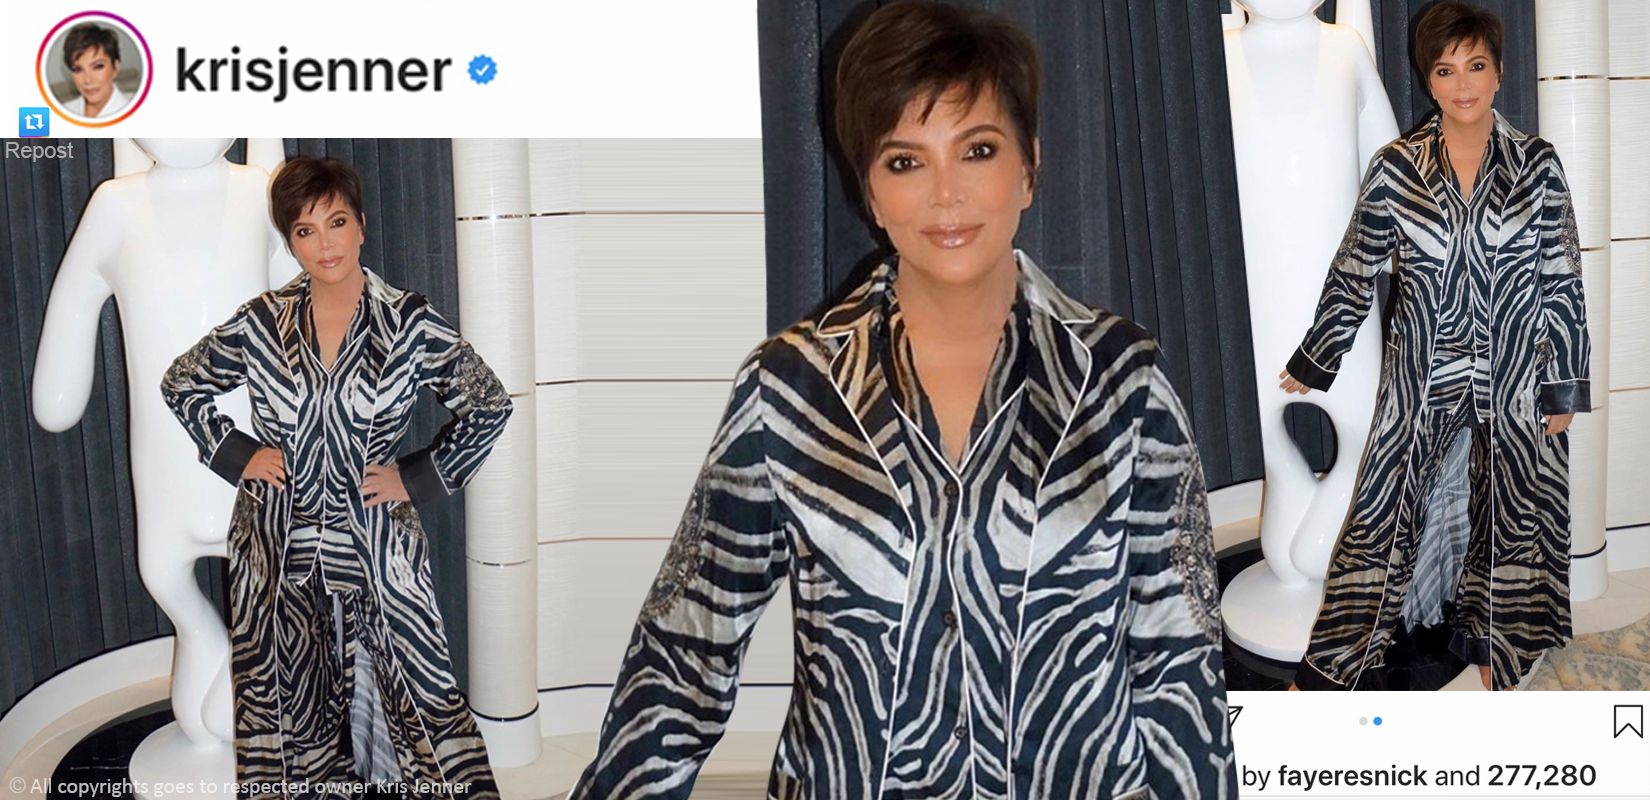 Top 10 Designer Loungewear Brand Kyle and Shahida [Kris Jenner Style] Spotted! Jenner Style